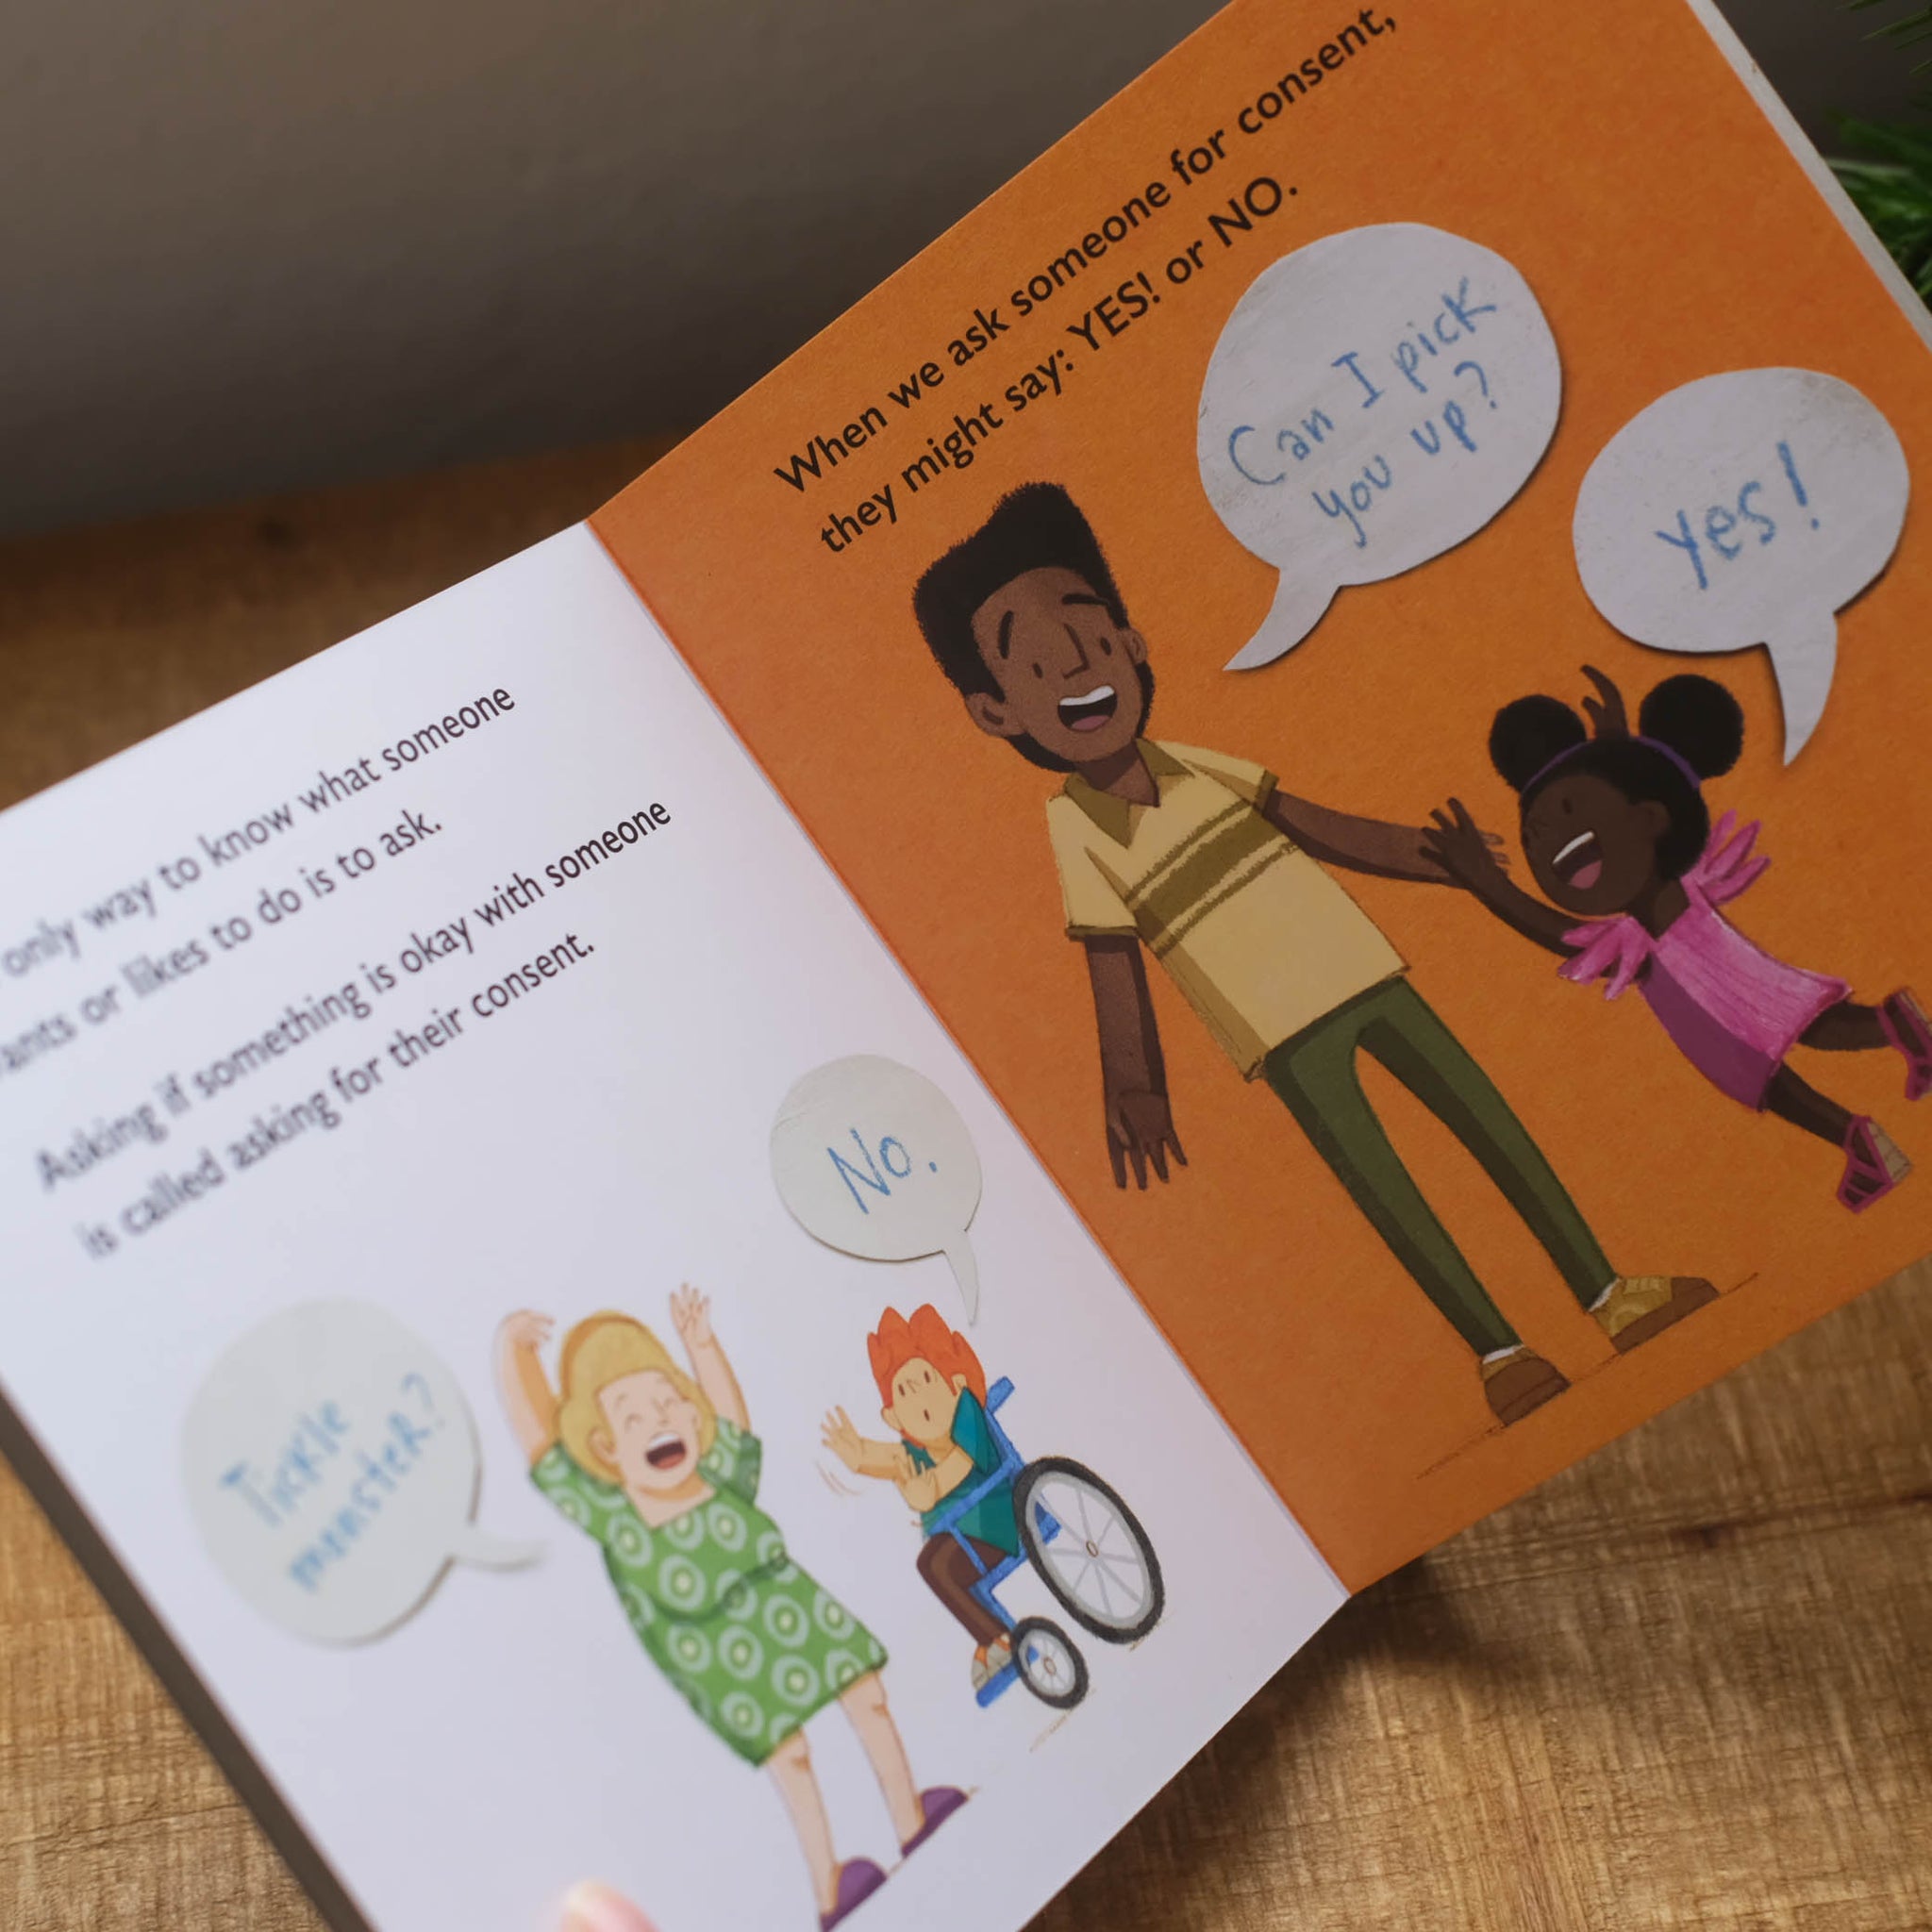 Yes! No!: A First Conversation About Consent (Boardbook)